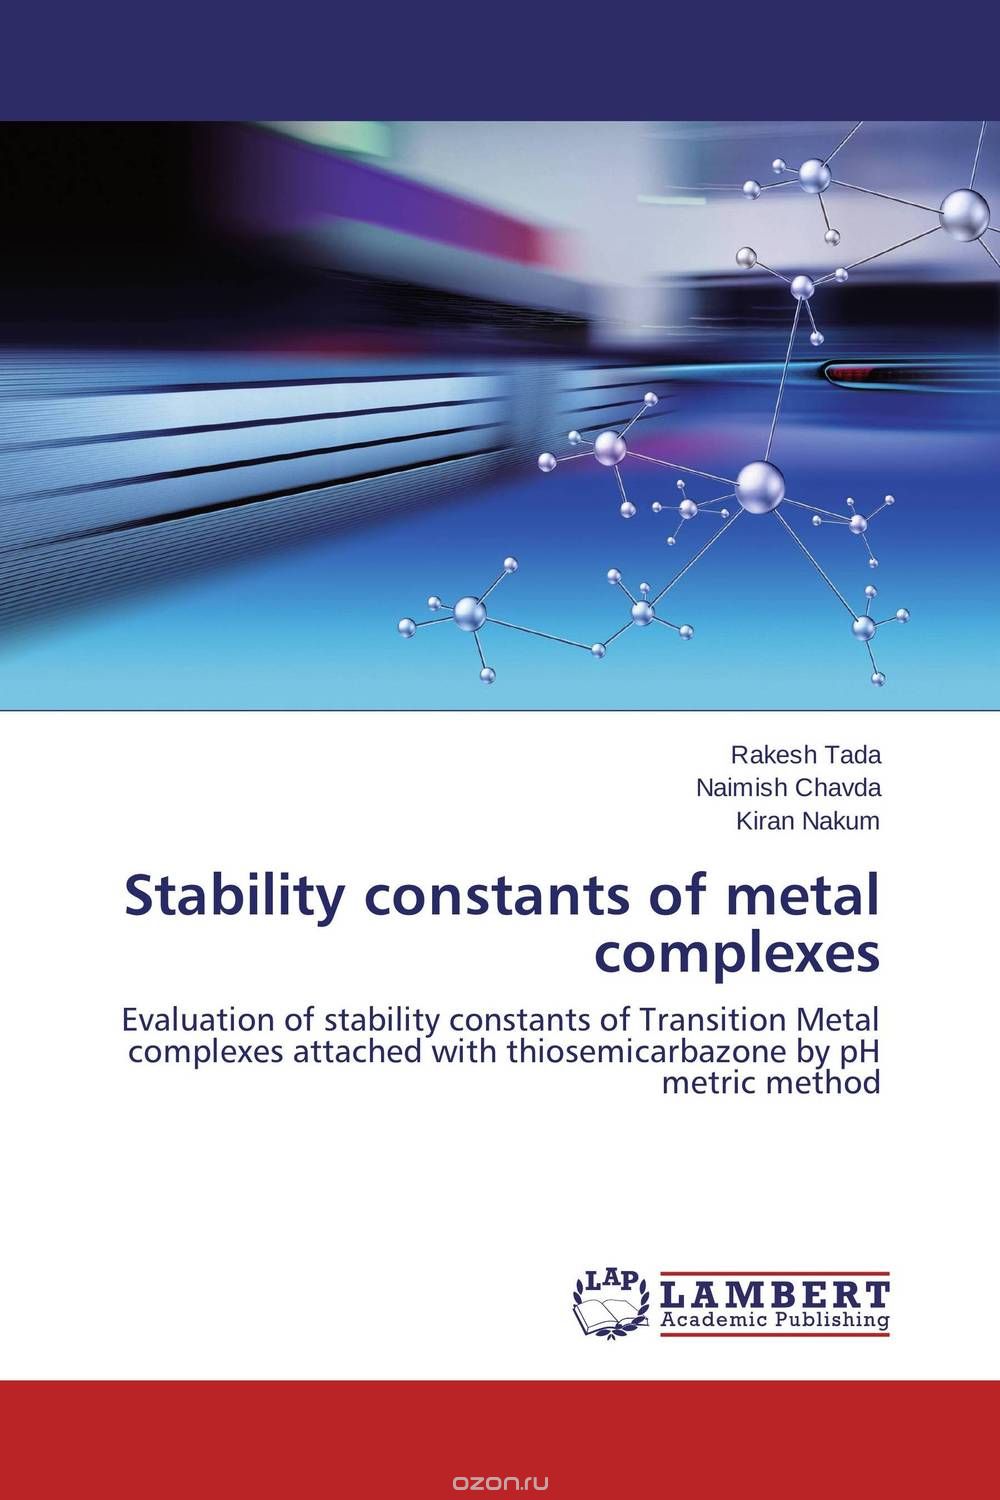 Stability constants of metal complexes